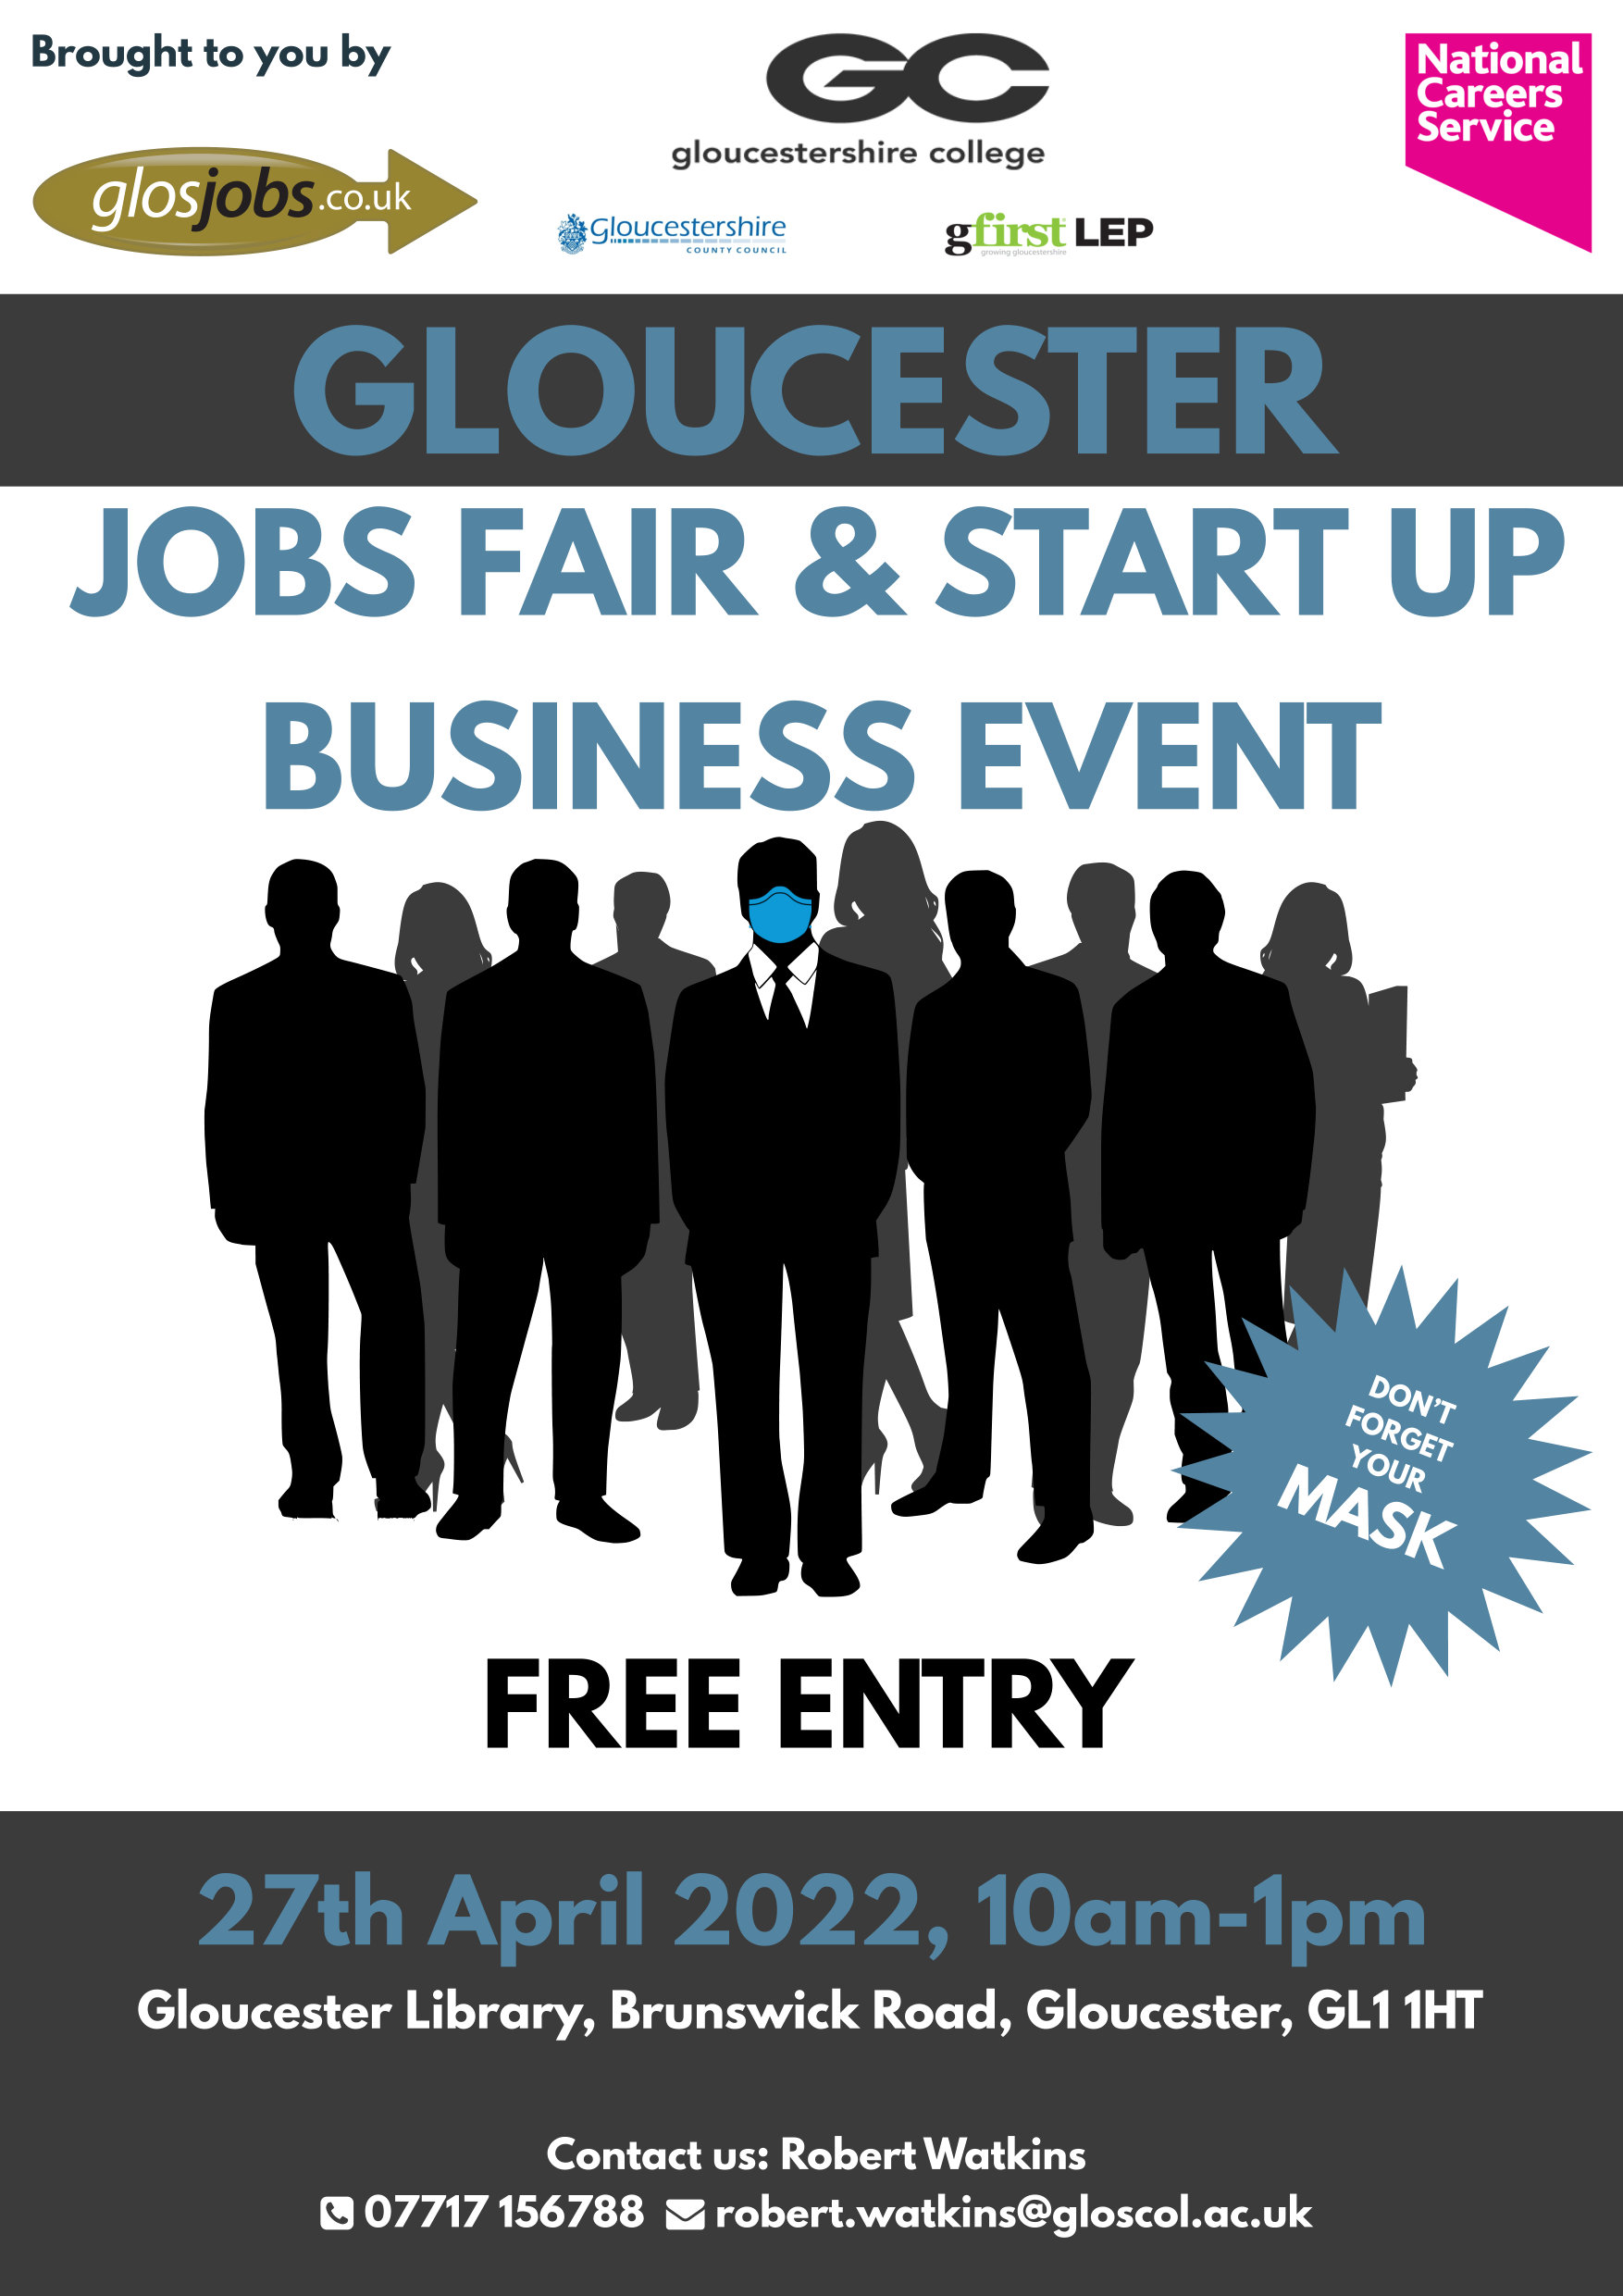 Jobs Fair & Start Up Business Event - 27th April 2022 - 10am to 1pm at the Gloucester Library